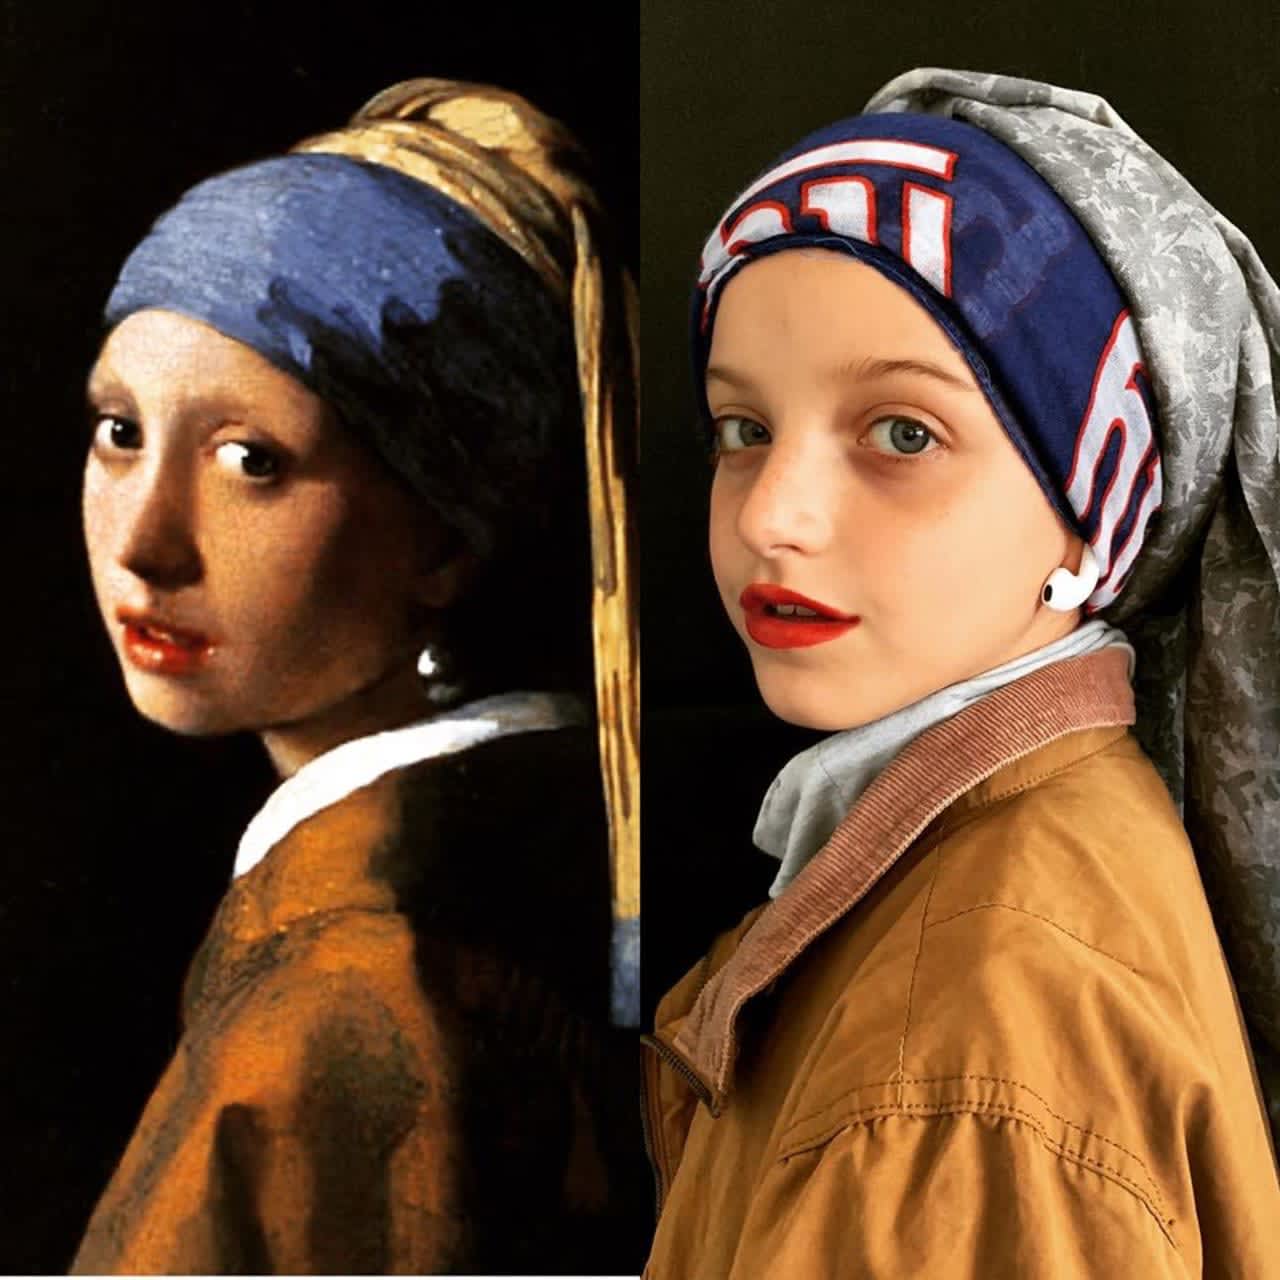 Brielle Lucchi, 9, as "Girl with a Pearl Earring."